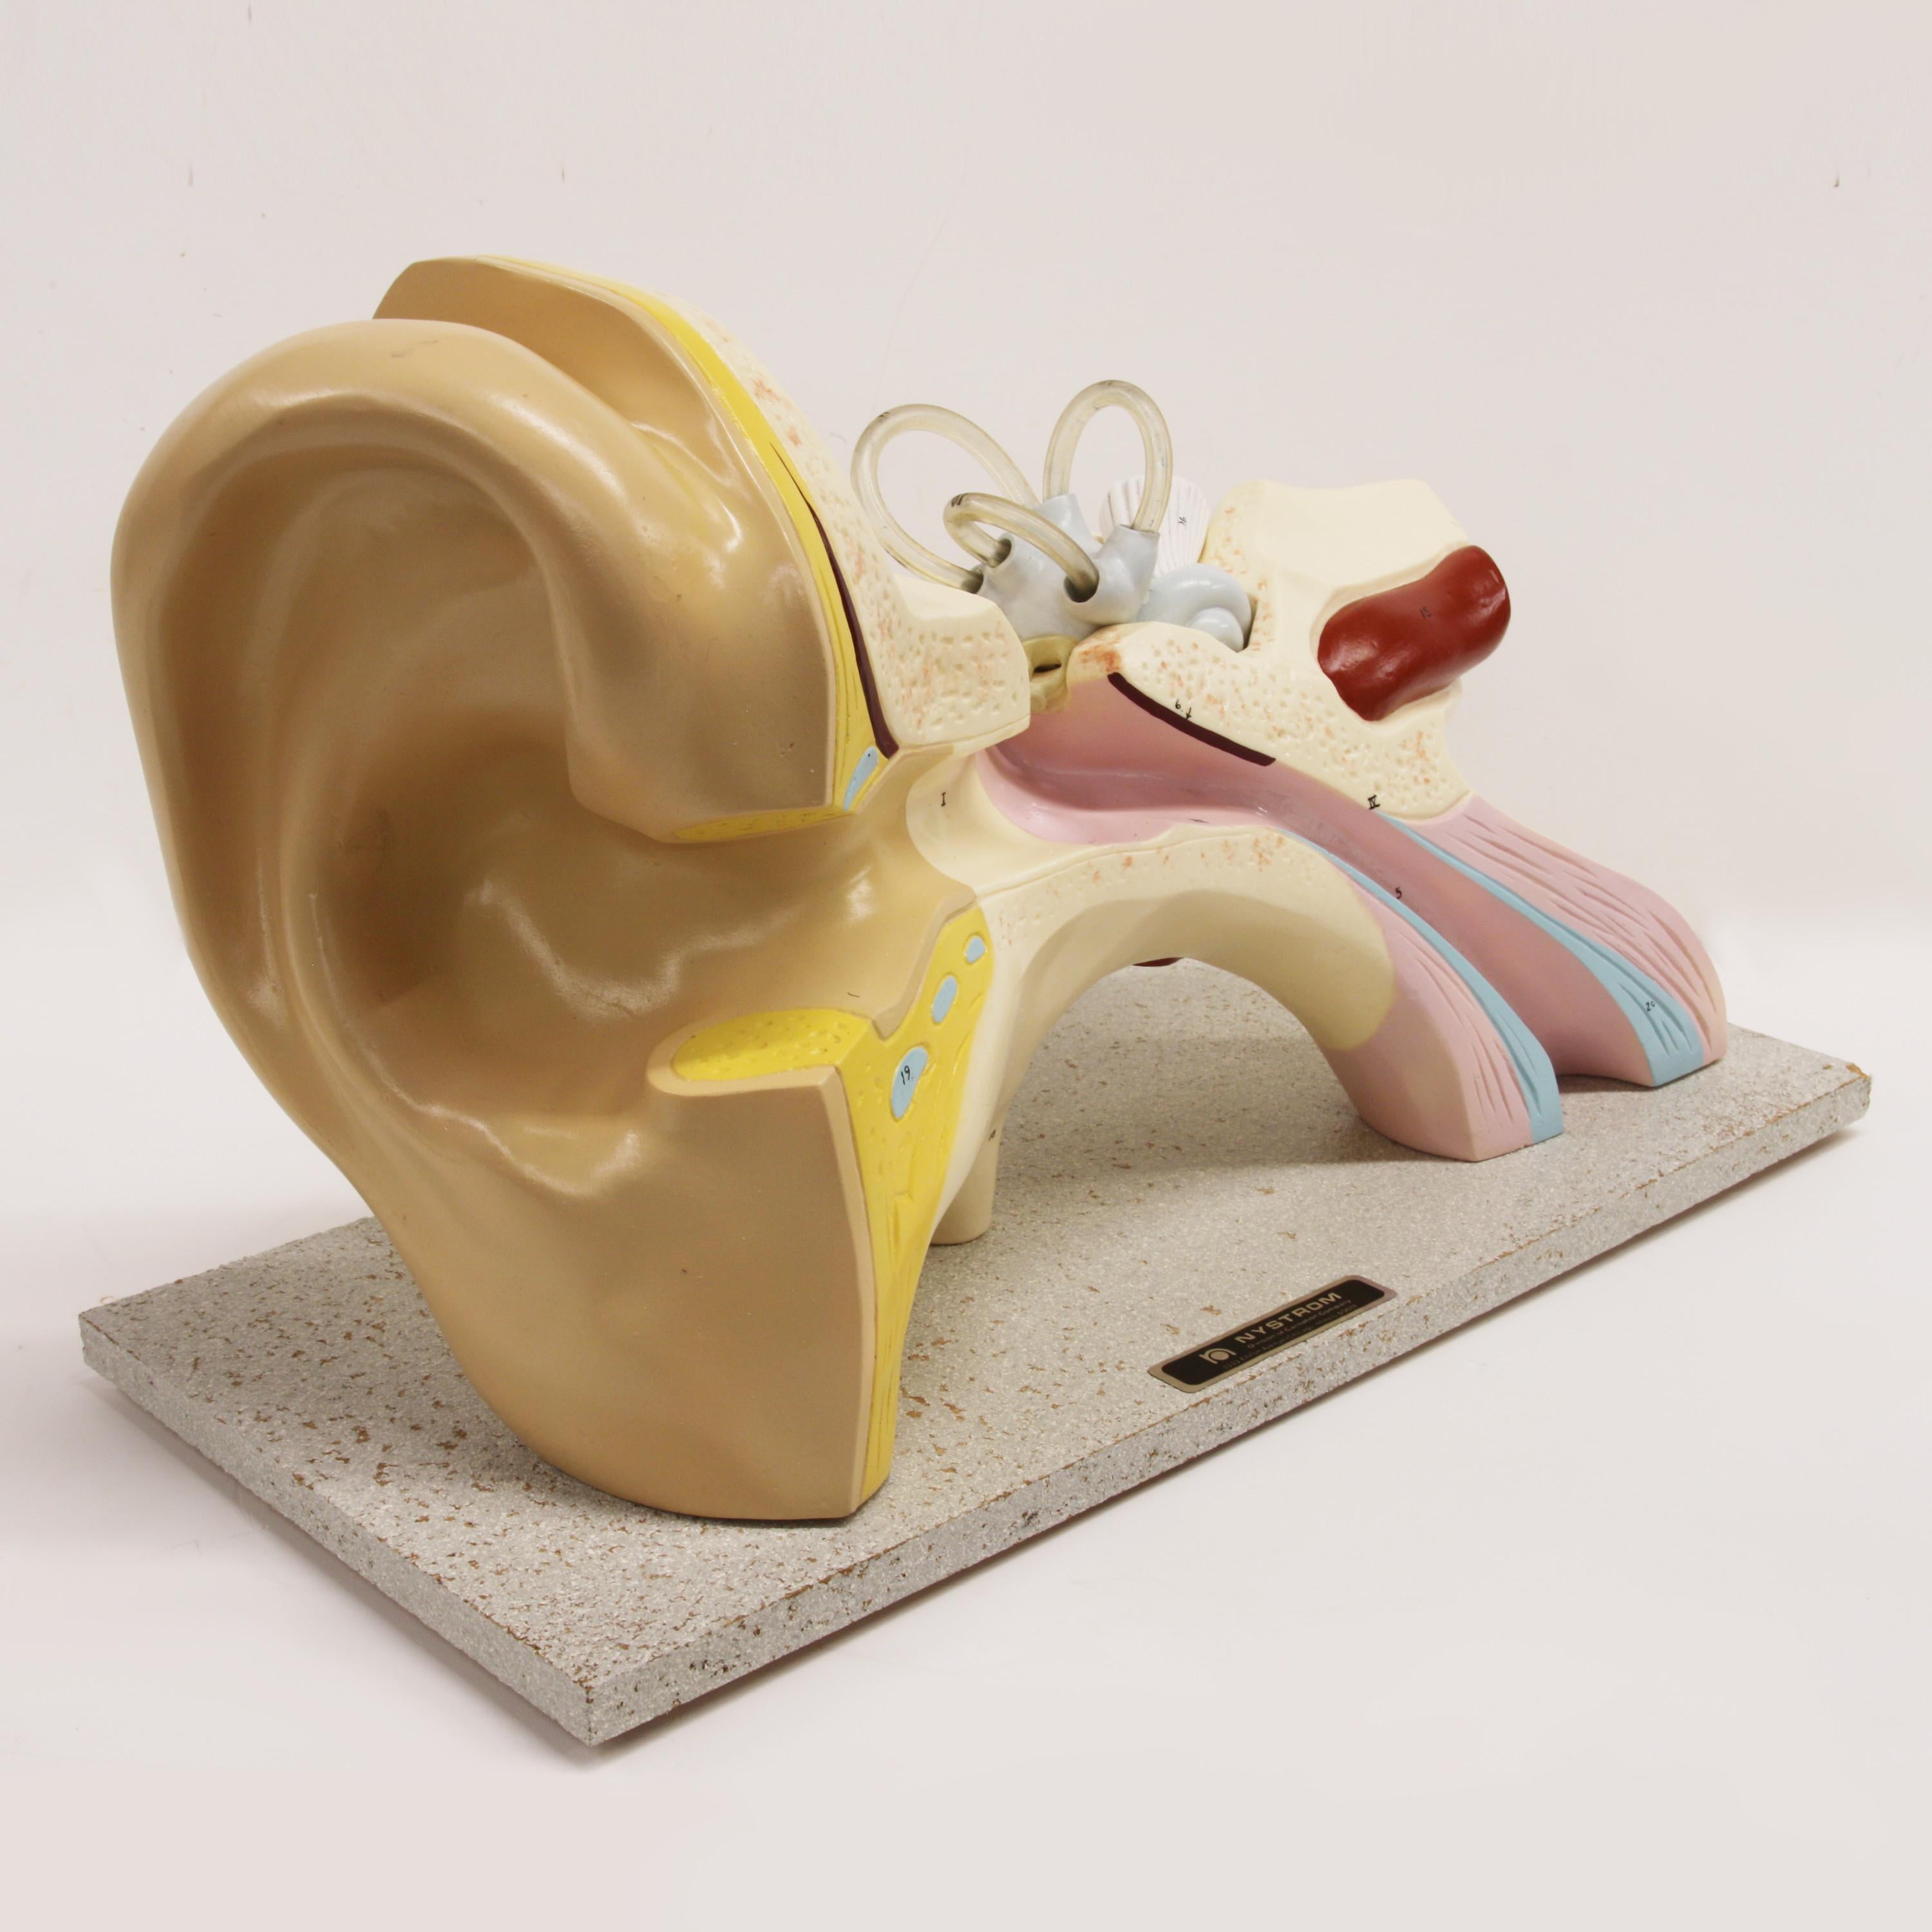 Large 1960's Vintage Scientific Anatomical Human 3D Ear Model. Manufactured by the Nystrom Co. of Chicago, Illinois. Large 17